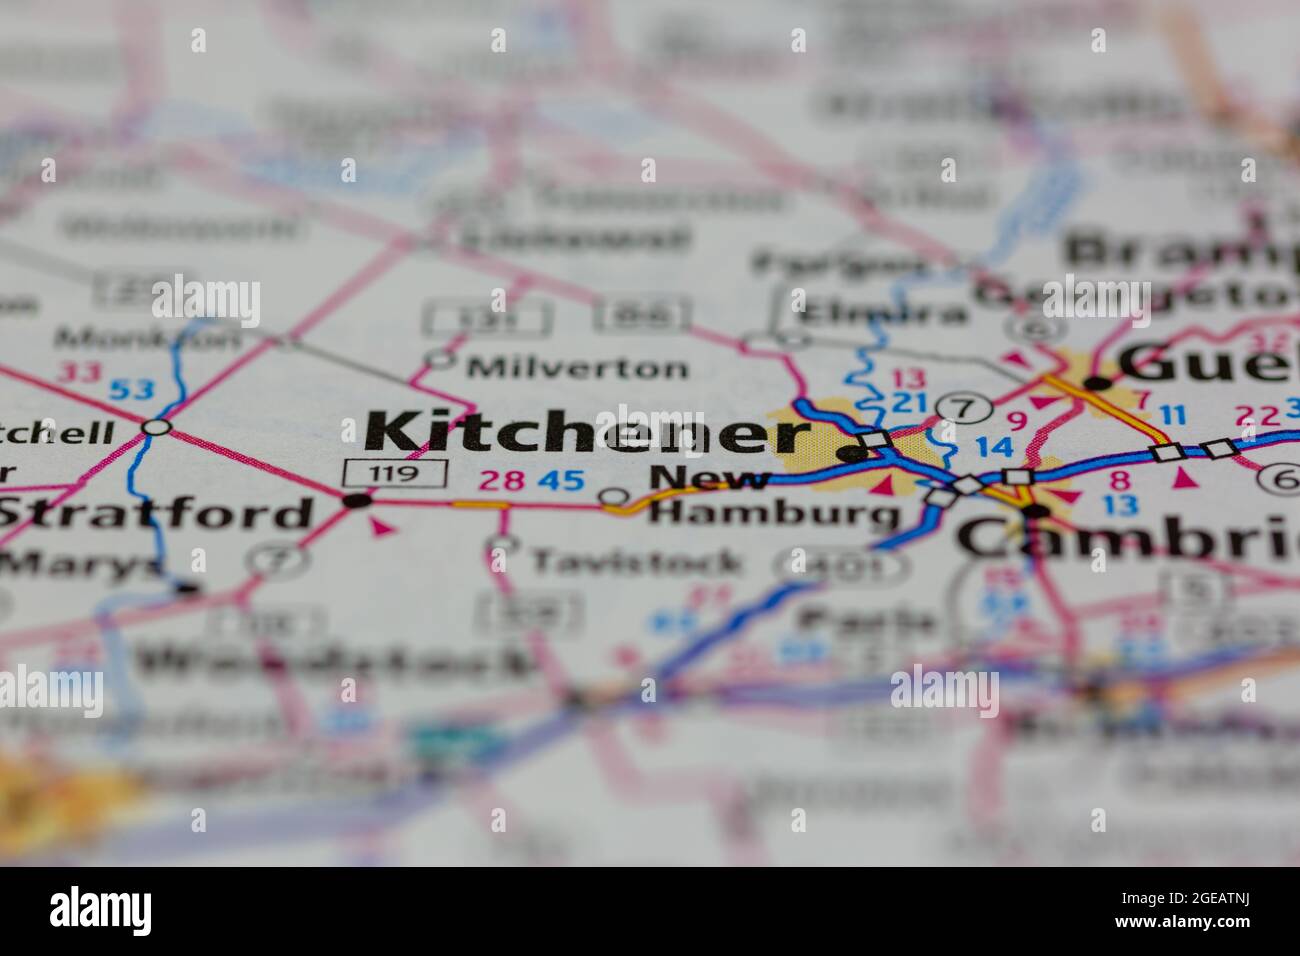 Kitchener Ontario Canada shown on a road map or Geography map Stock Photo